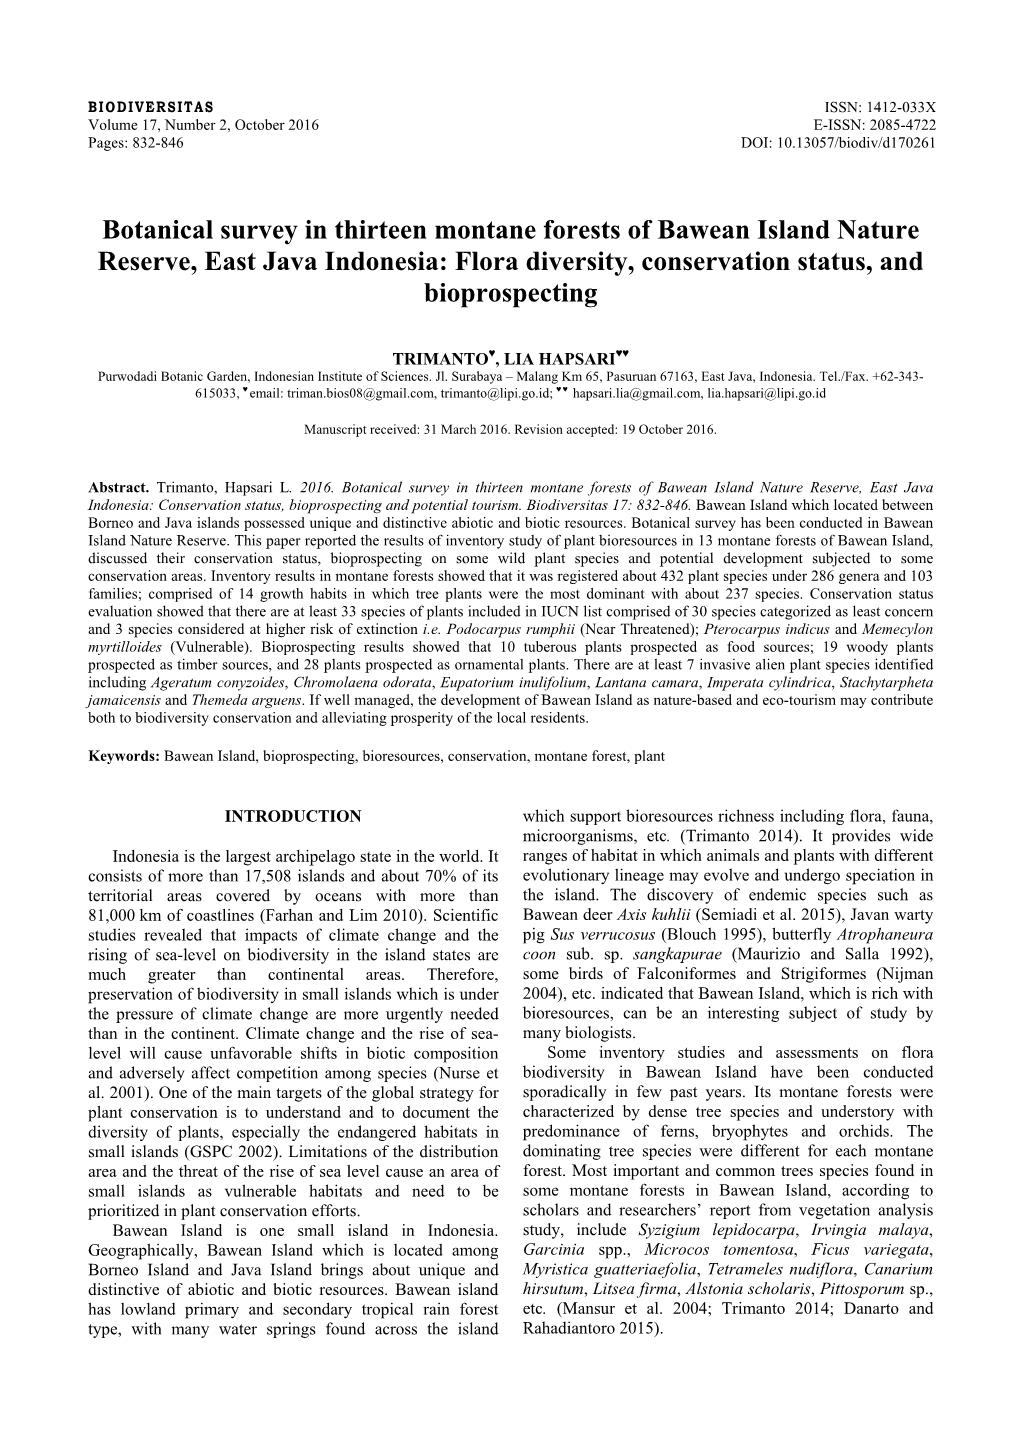 Botanical Survey in Thirteen Montane Forests of Bawean Island Nature Reserve, East Java Indonesia: Flora Diversity, Conservation Status, and Bioprospecting